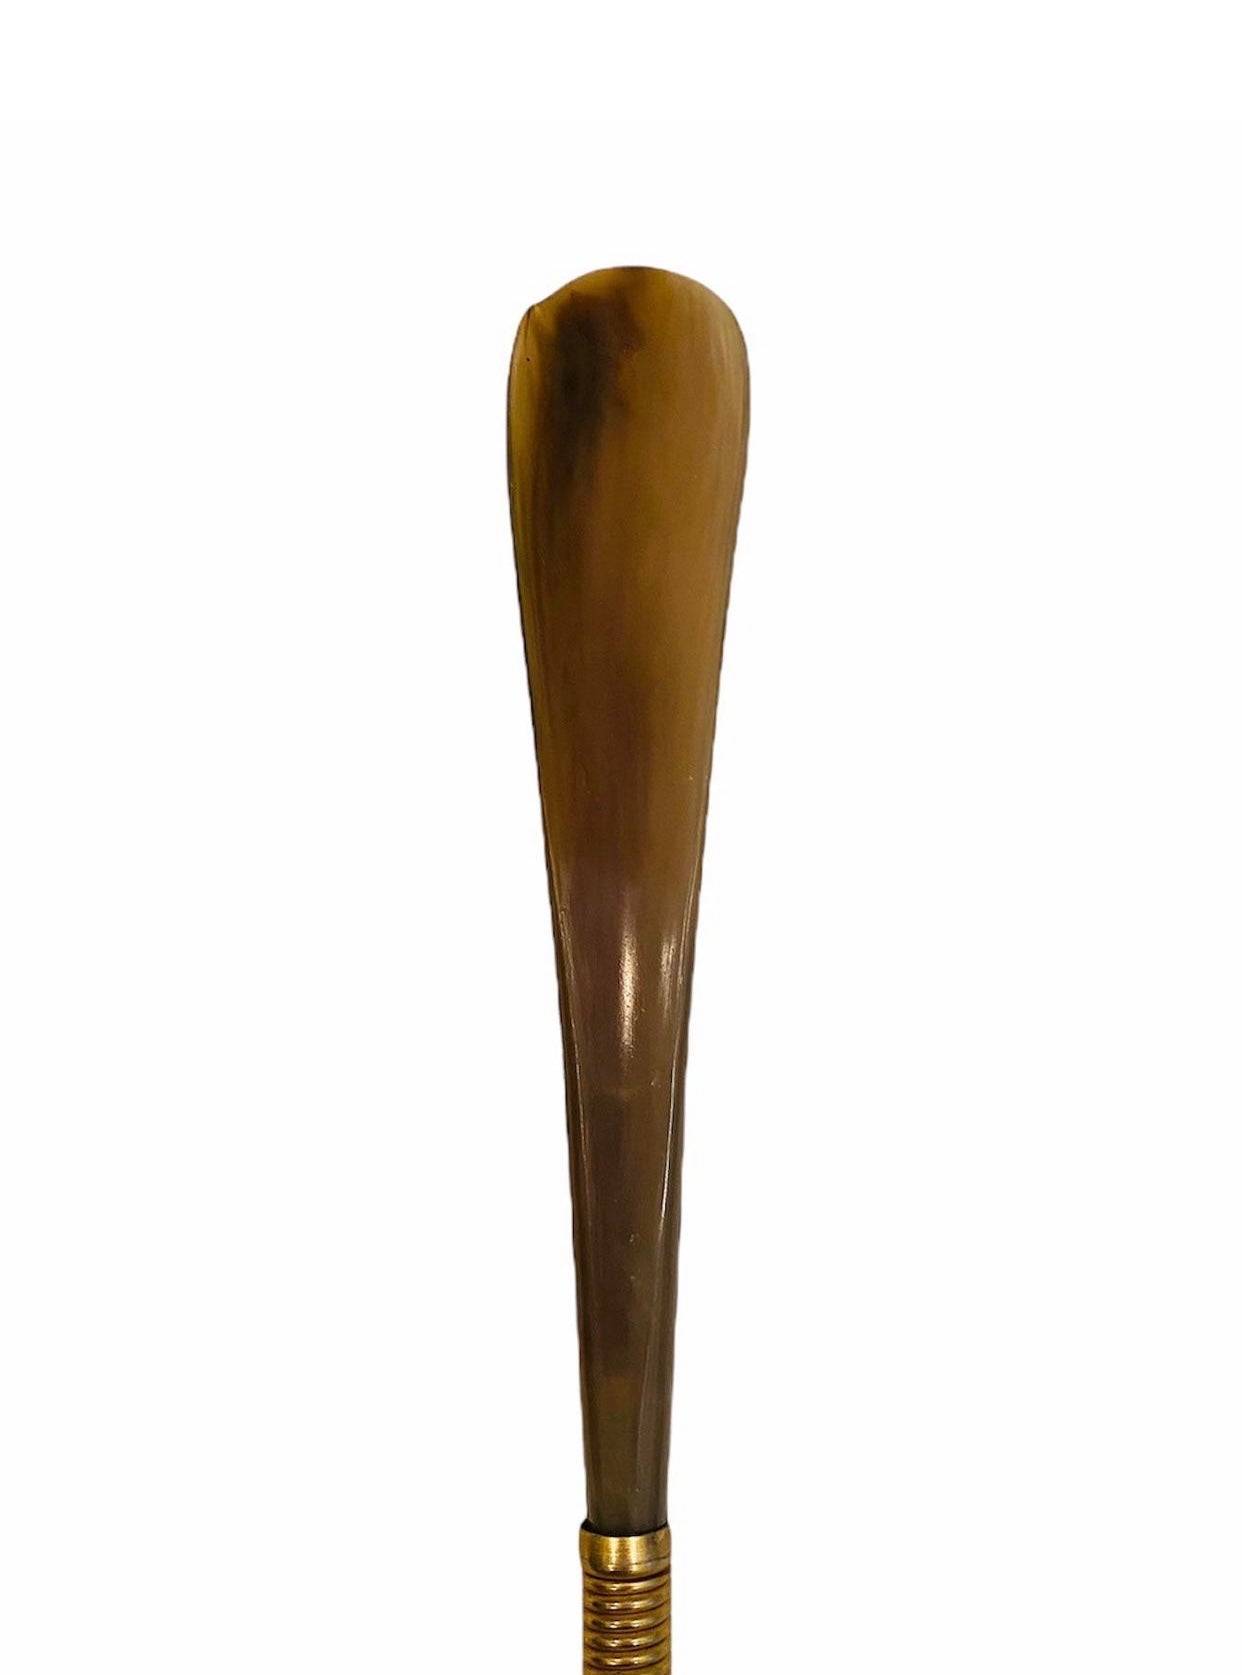 Vintage Twisted Bamboo Shoe Horn